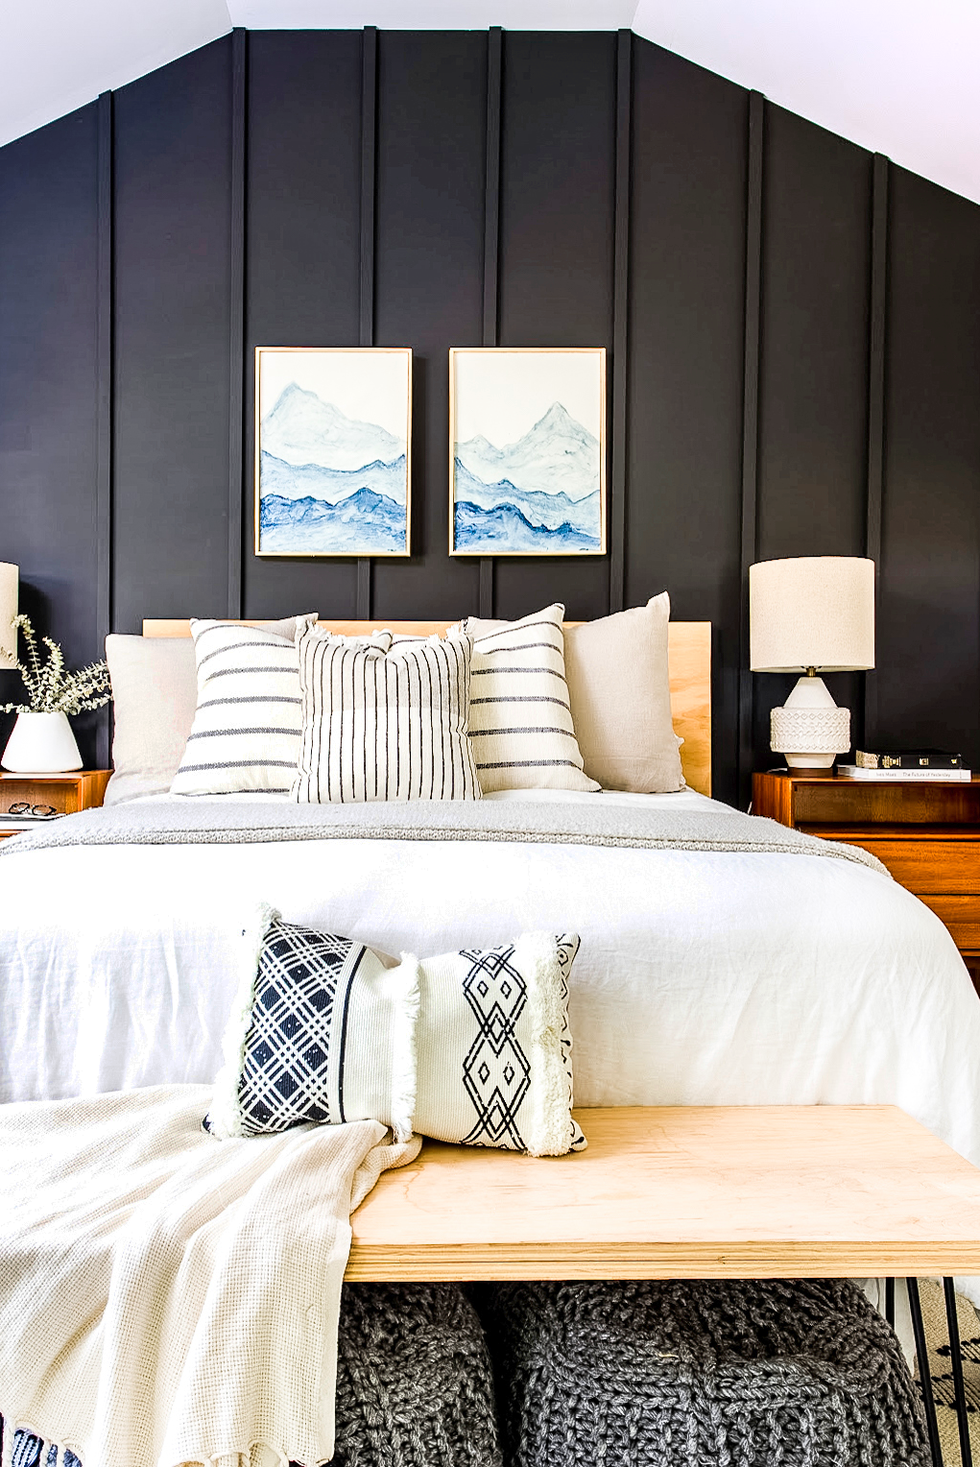 11 Decorative Pillow Trends to Expect in 2021 - Bob Vila